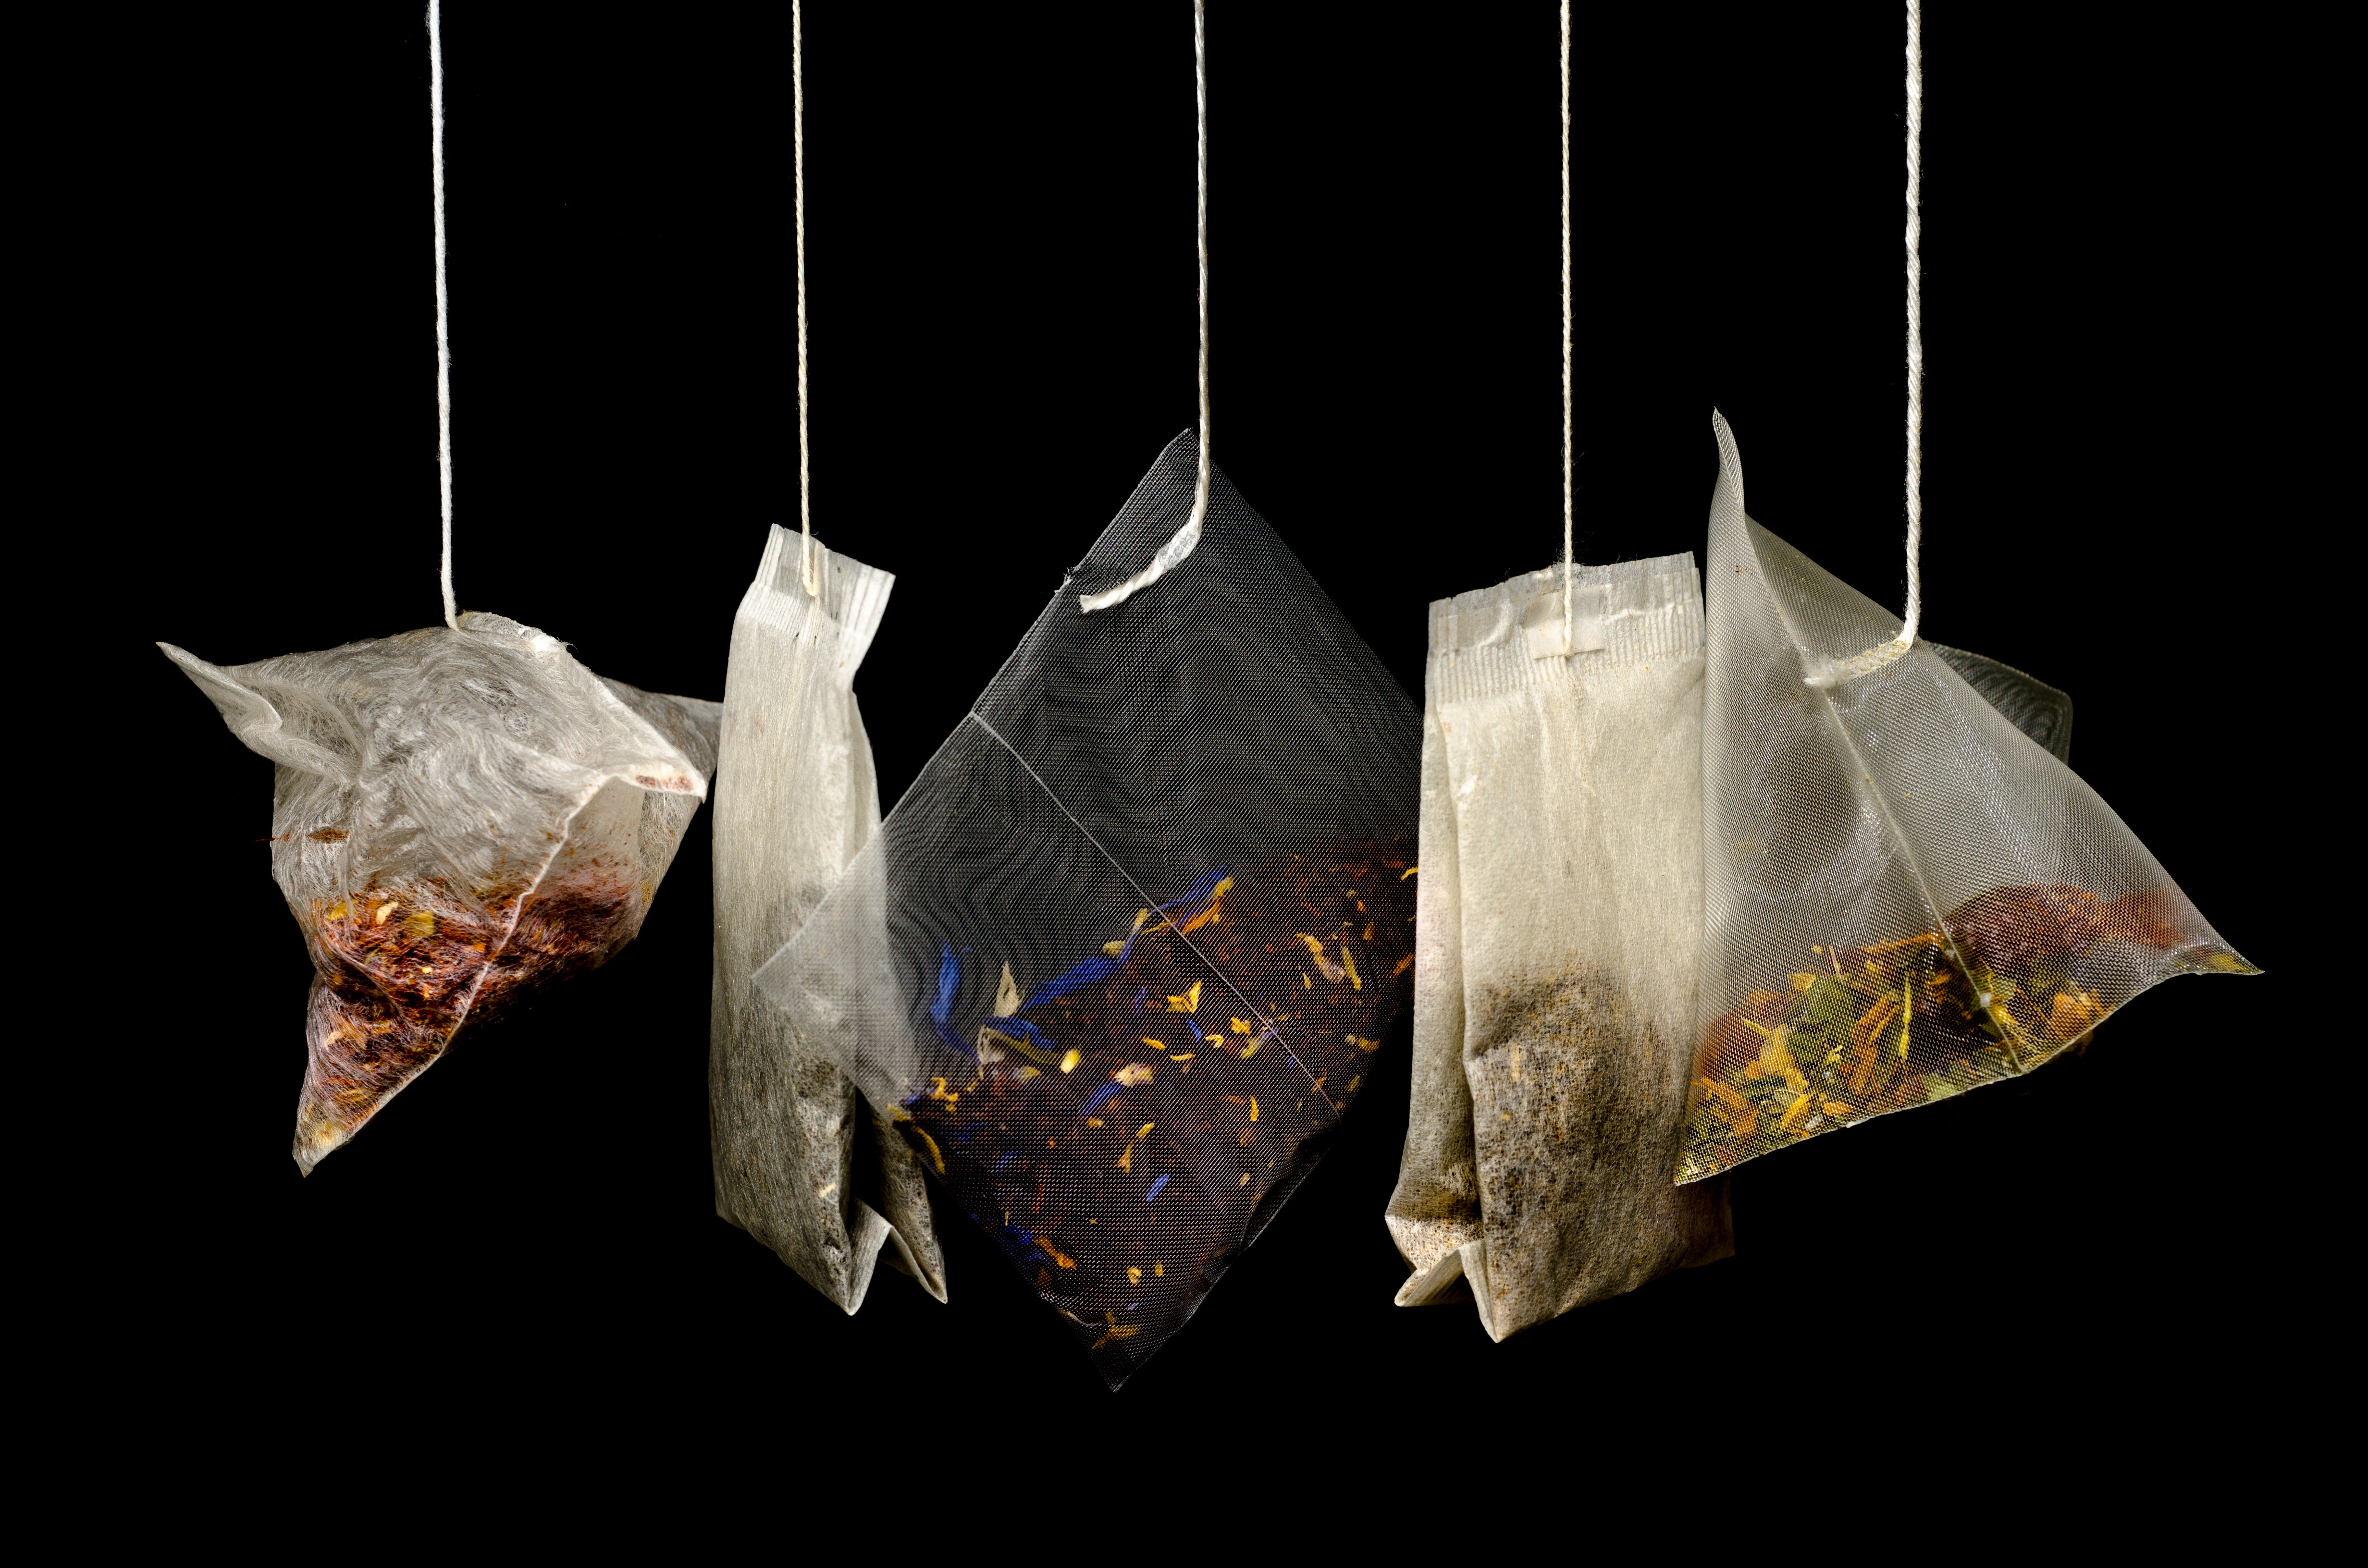 different types of tea bags